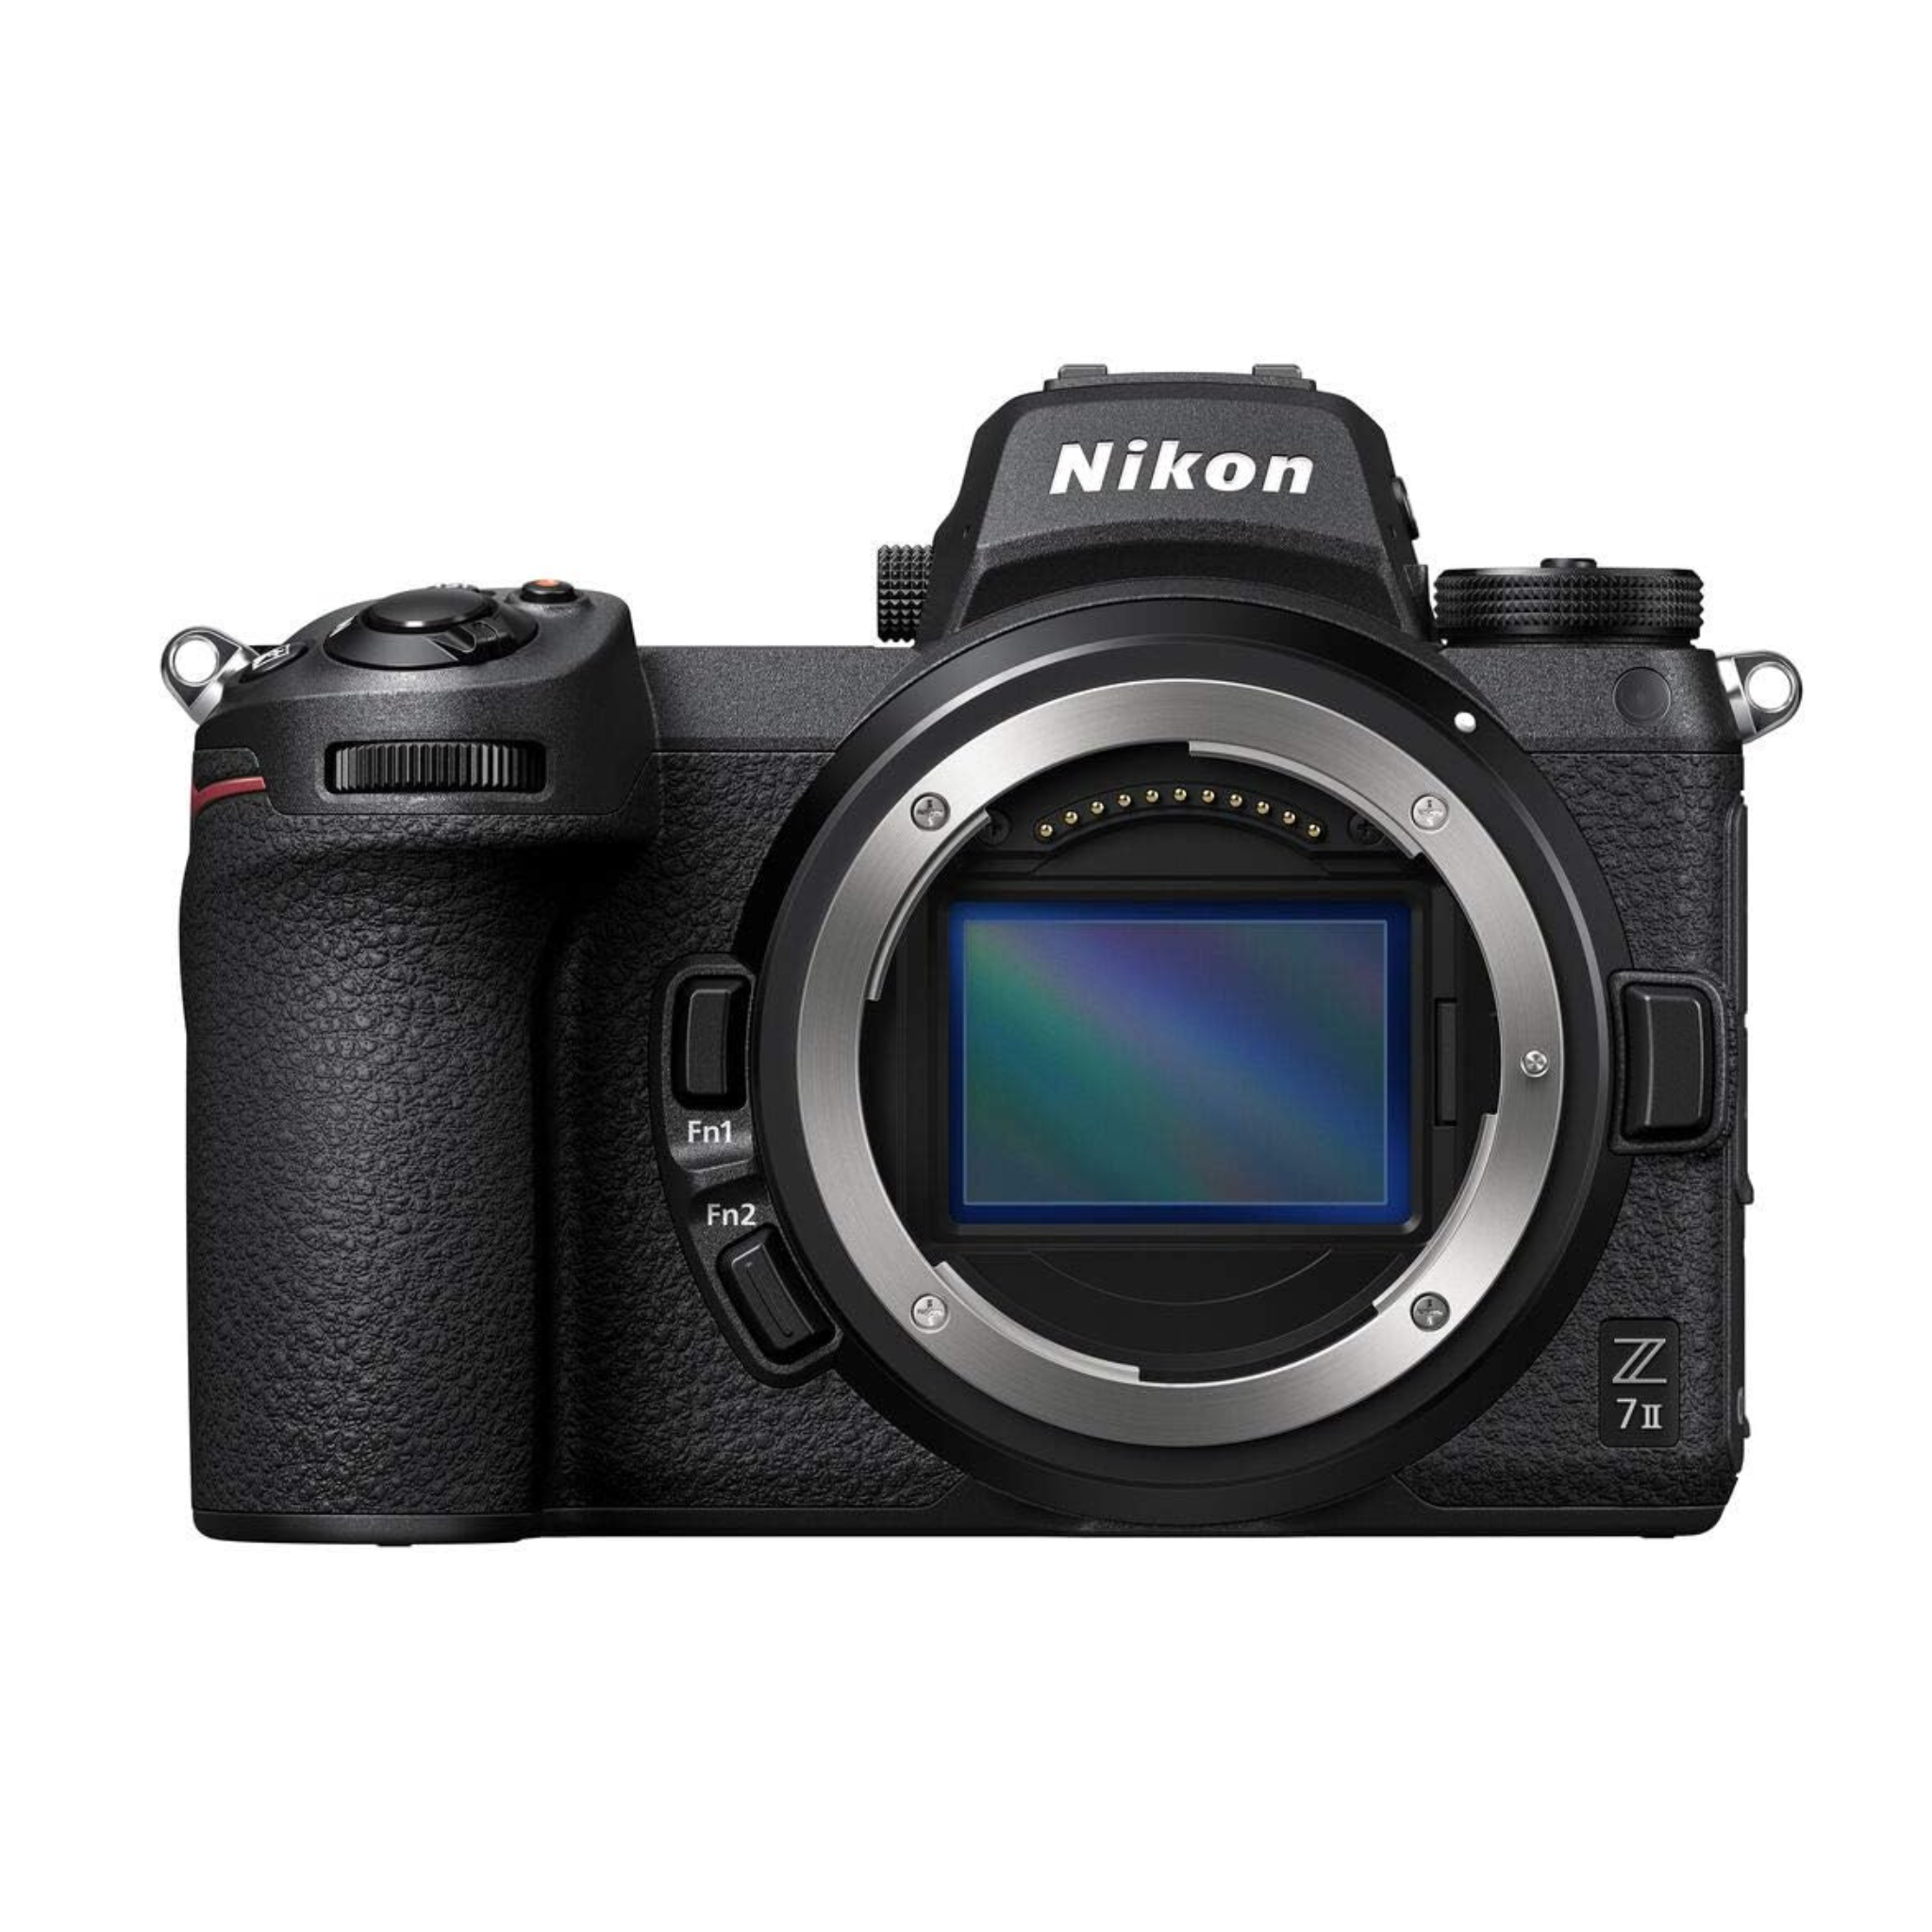 Nikon Z7 II Mirrorless Camera (Body Only) with Accessories